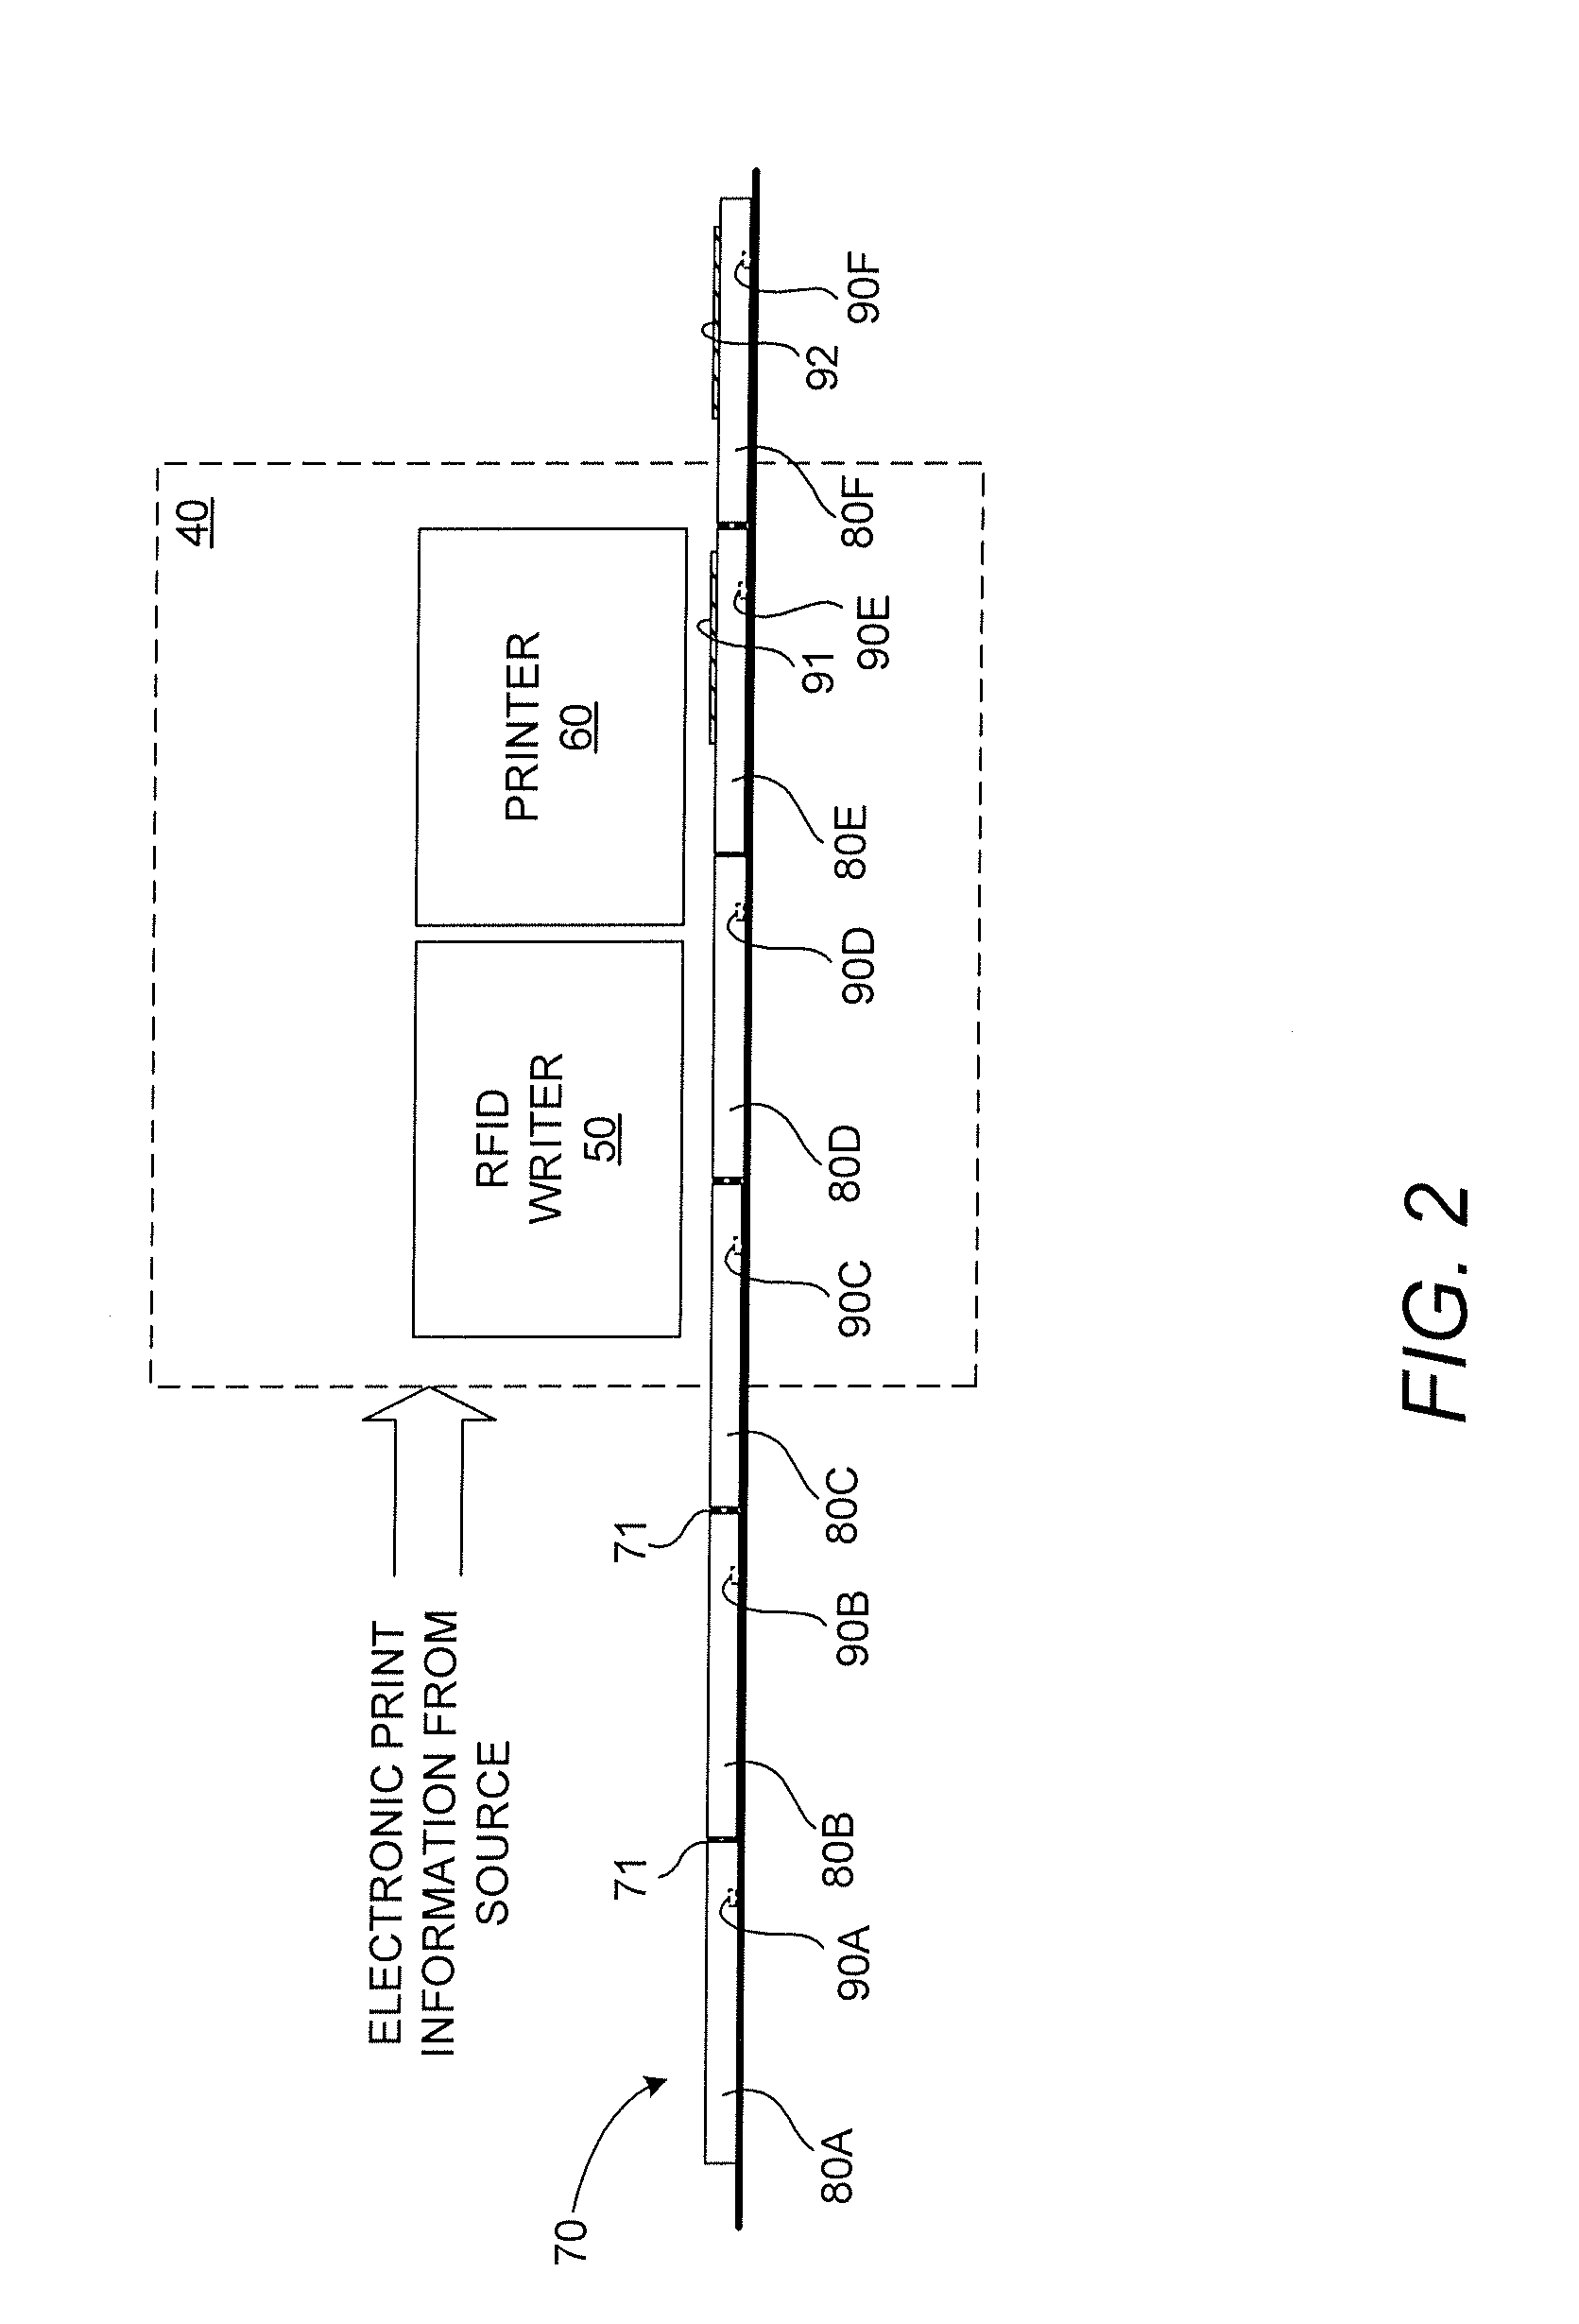 Content-Carrying Device for Carrying Printed Content That Includes a Key Device Programmed With Information That Enables the Content-Carrying Device to be Used to Access Other Content Via the Key Device